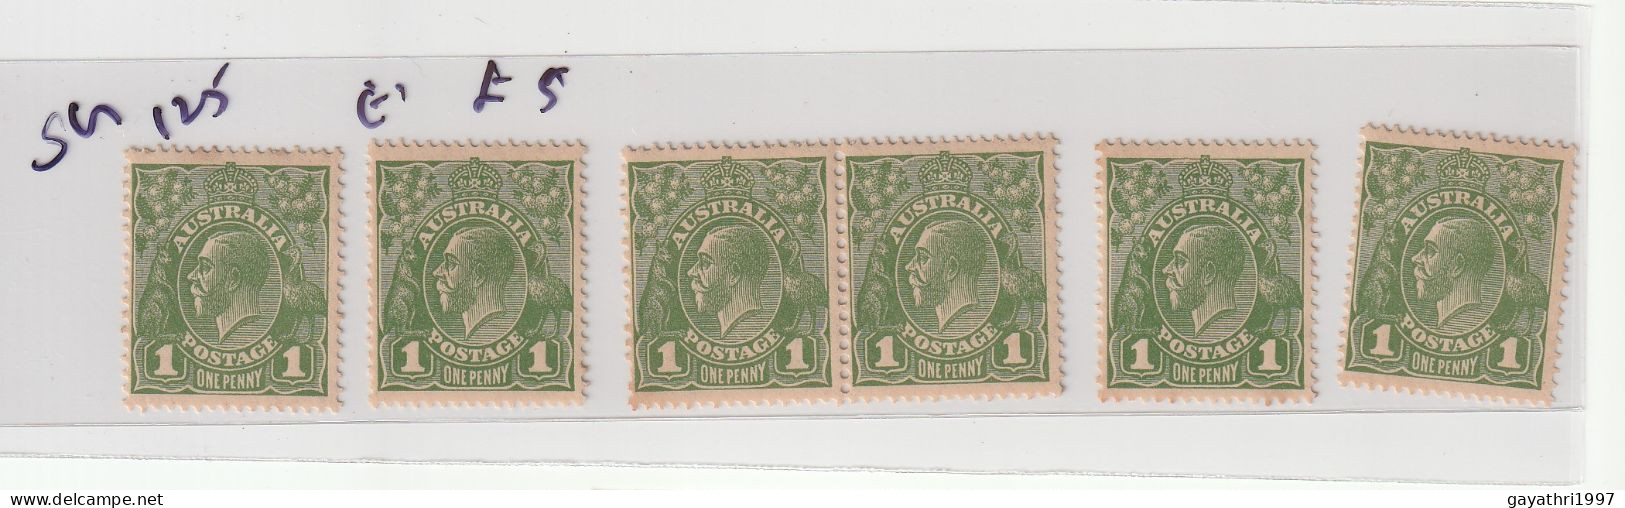 Australia 1931 . SG 125  Mint Hinged 5 Numbers MNH 1 Number Total 6 Numbers Good Condition (AS81) - Mint Stamps